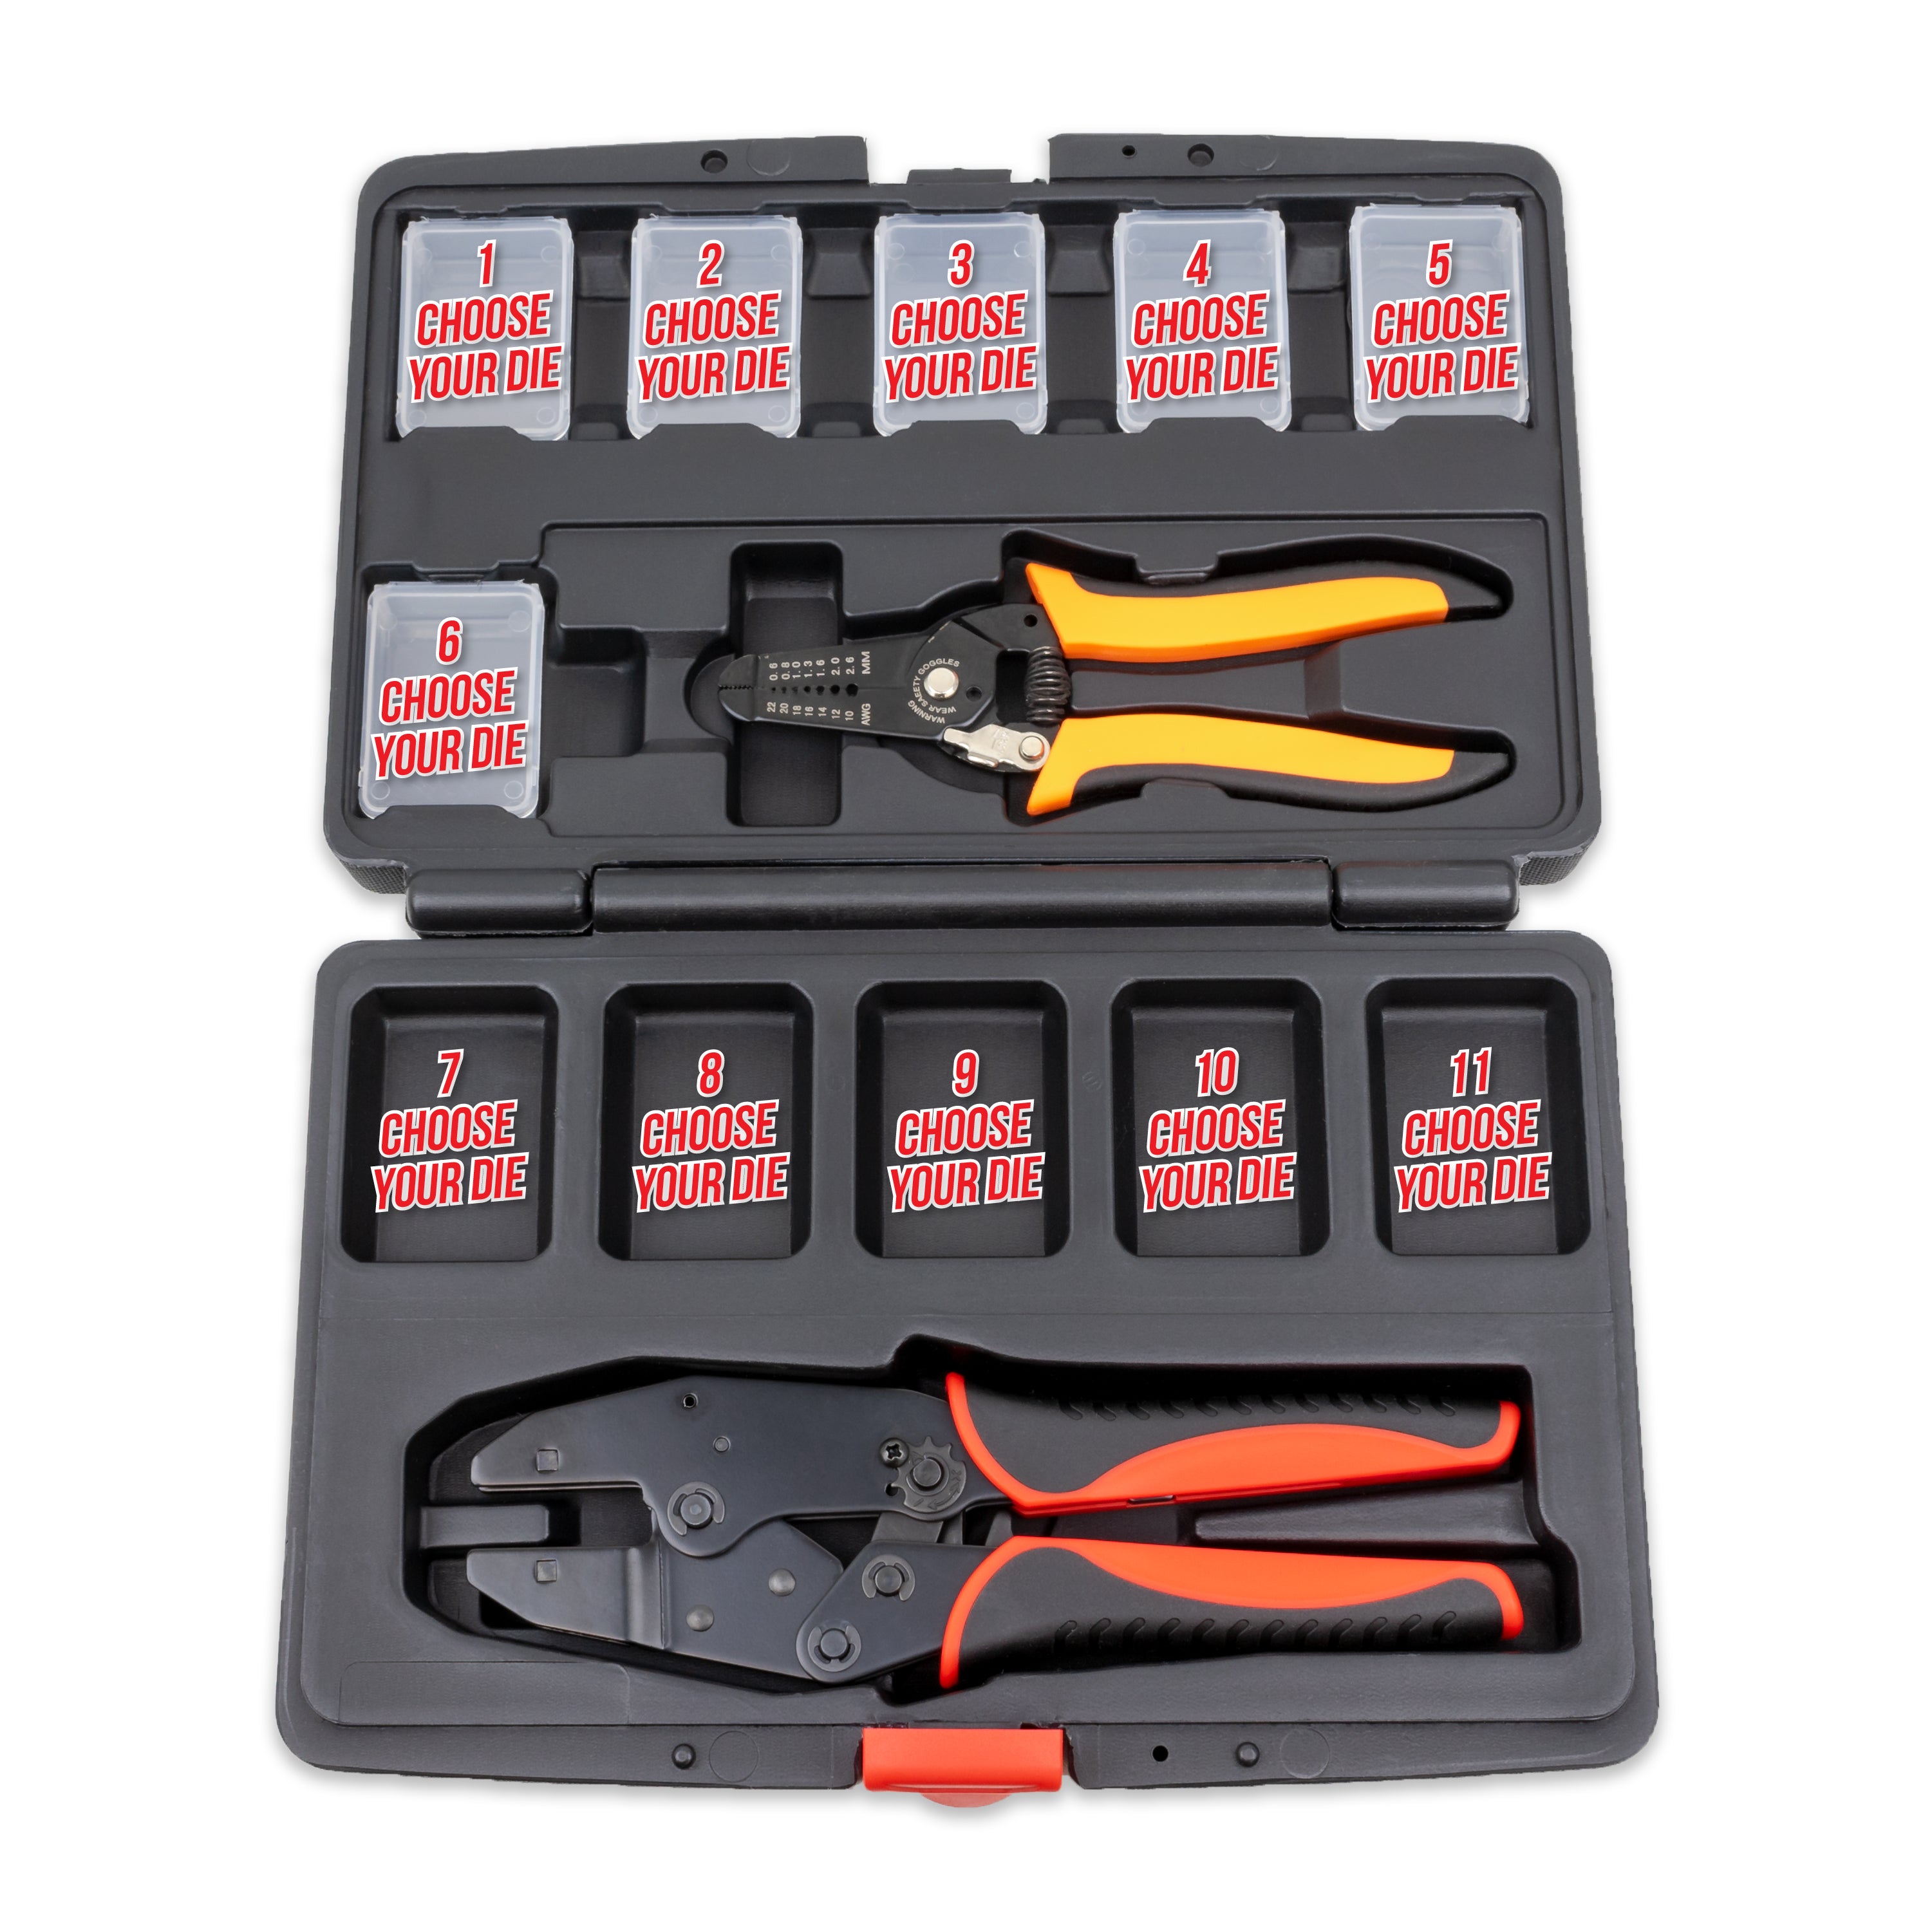 Interchangeable Ratcheting Terminal Crimper Set - 11 Die Sets with Wire Strippers (Choose Your Own Dies)